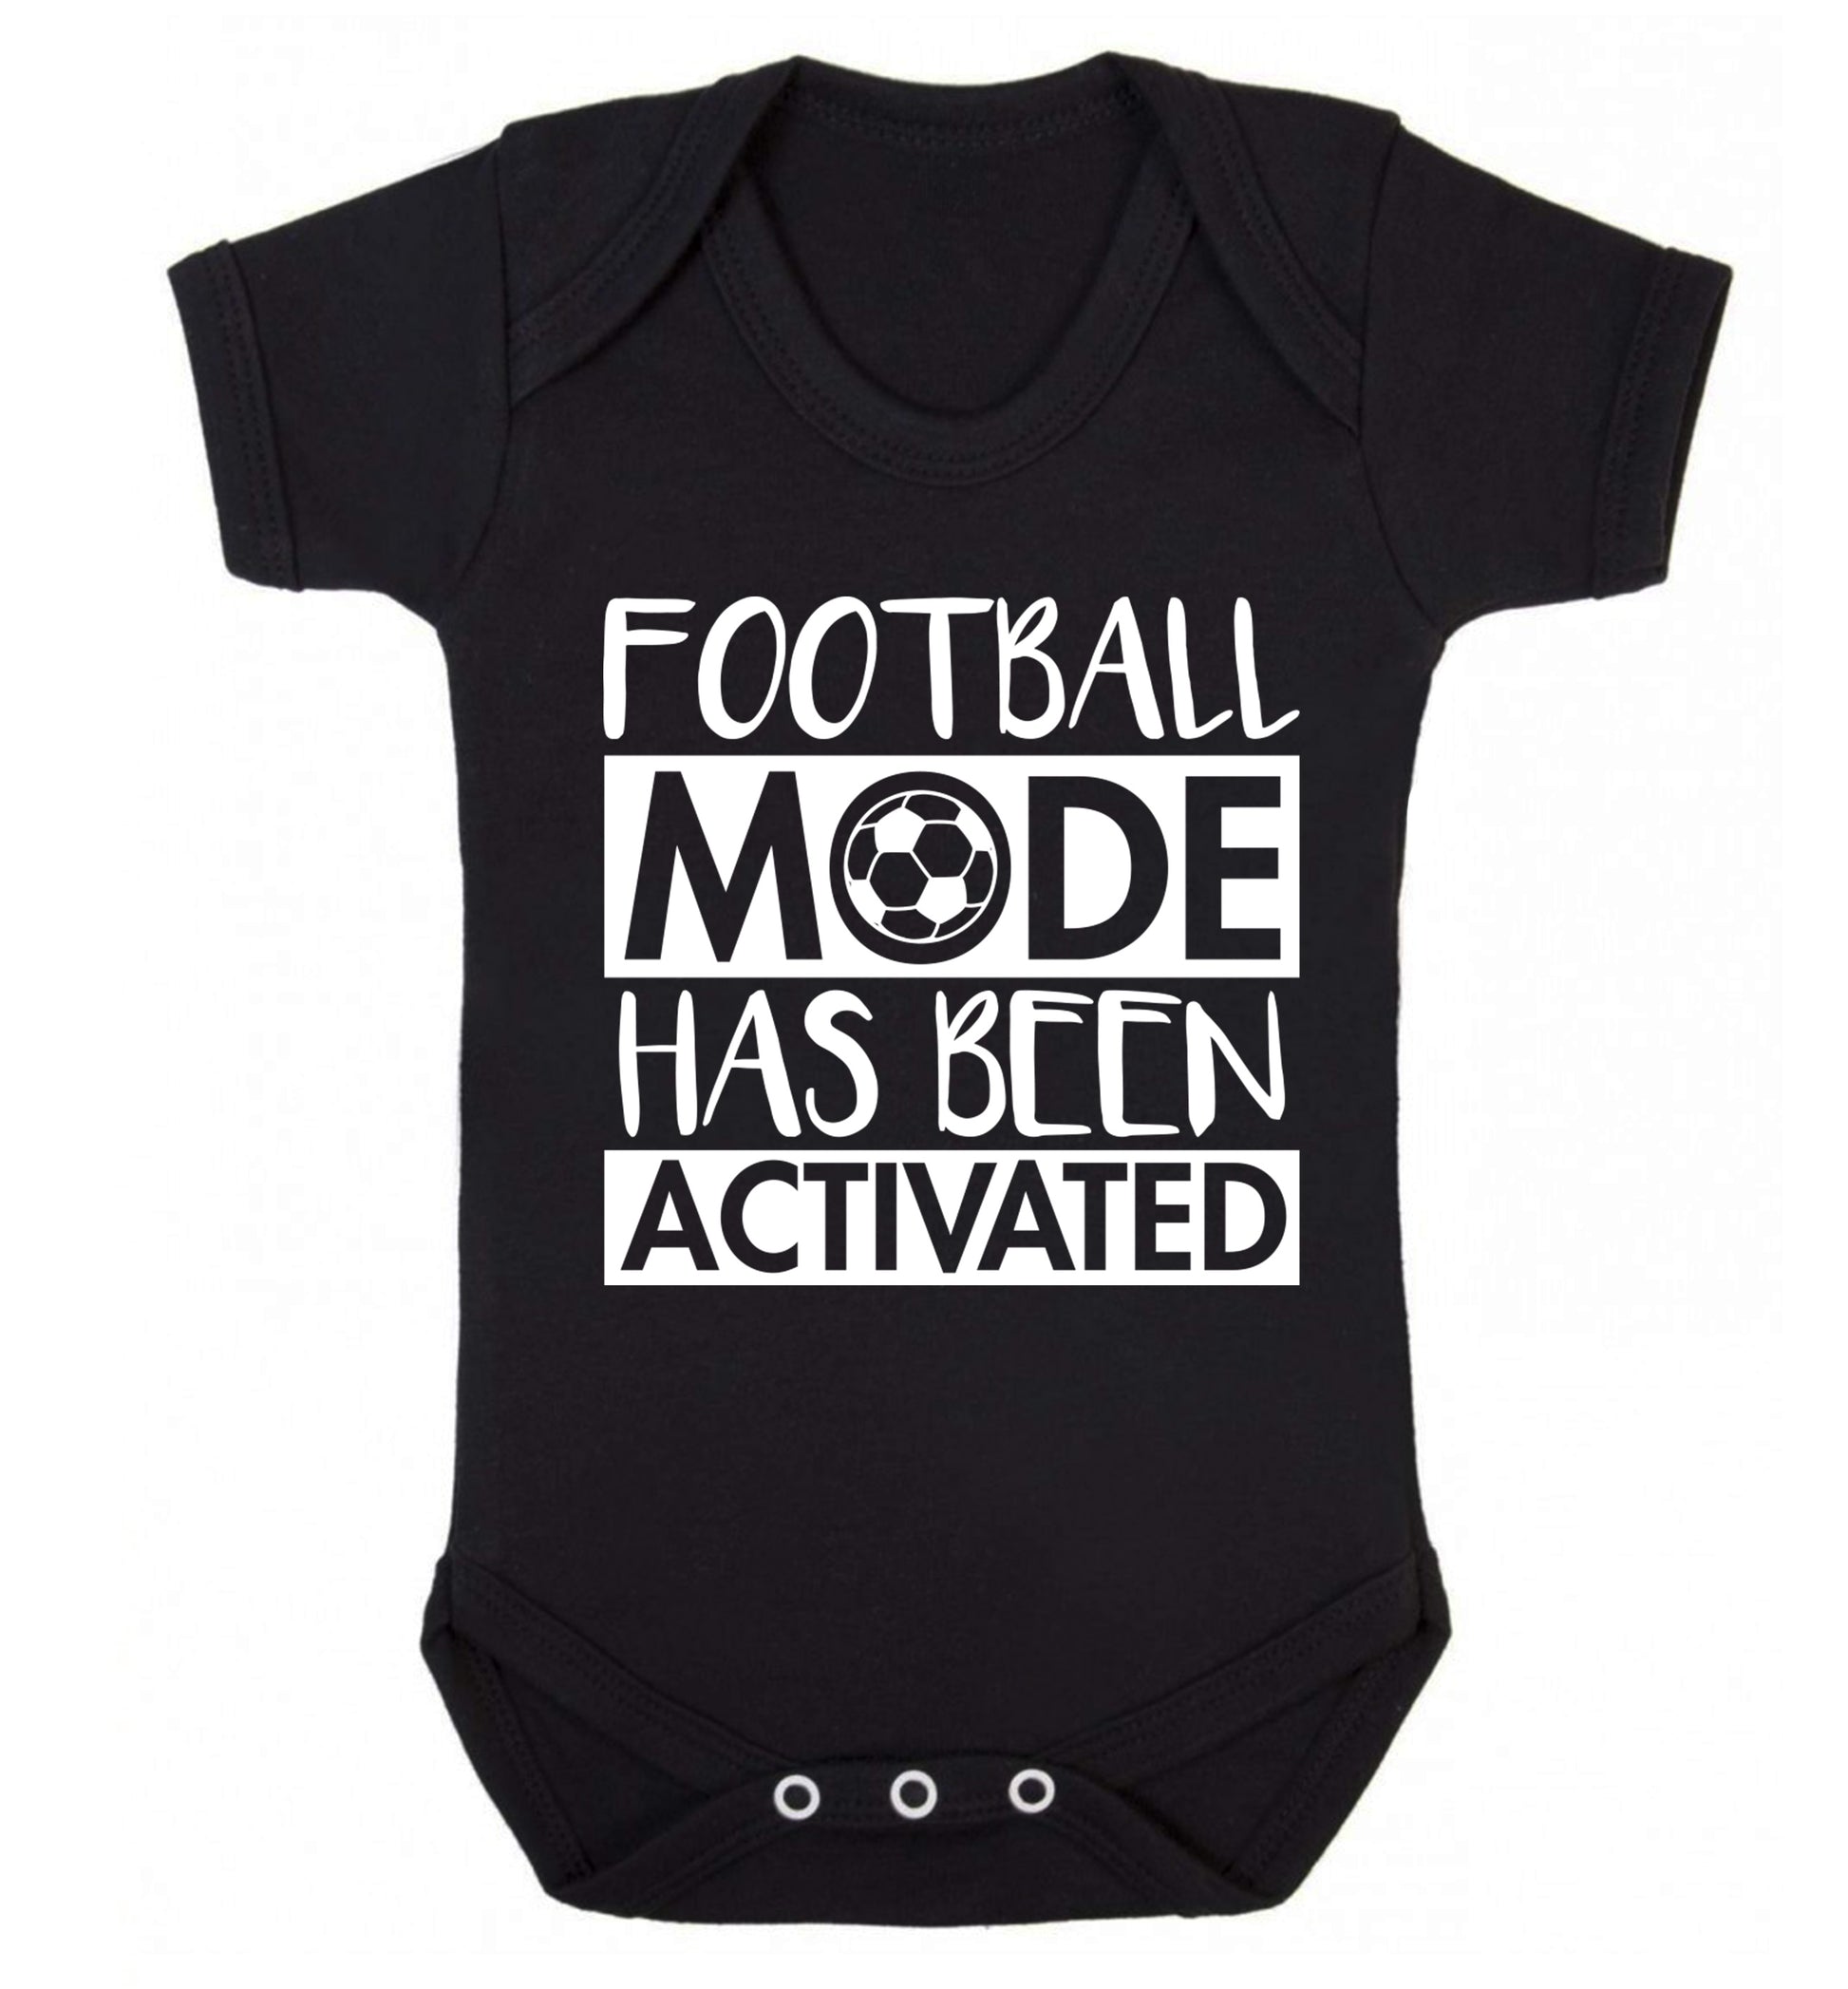 Football mode has been activated Baby Vest black 18-24 months